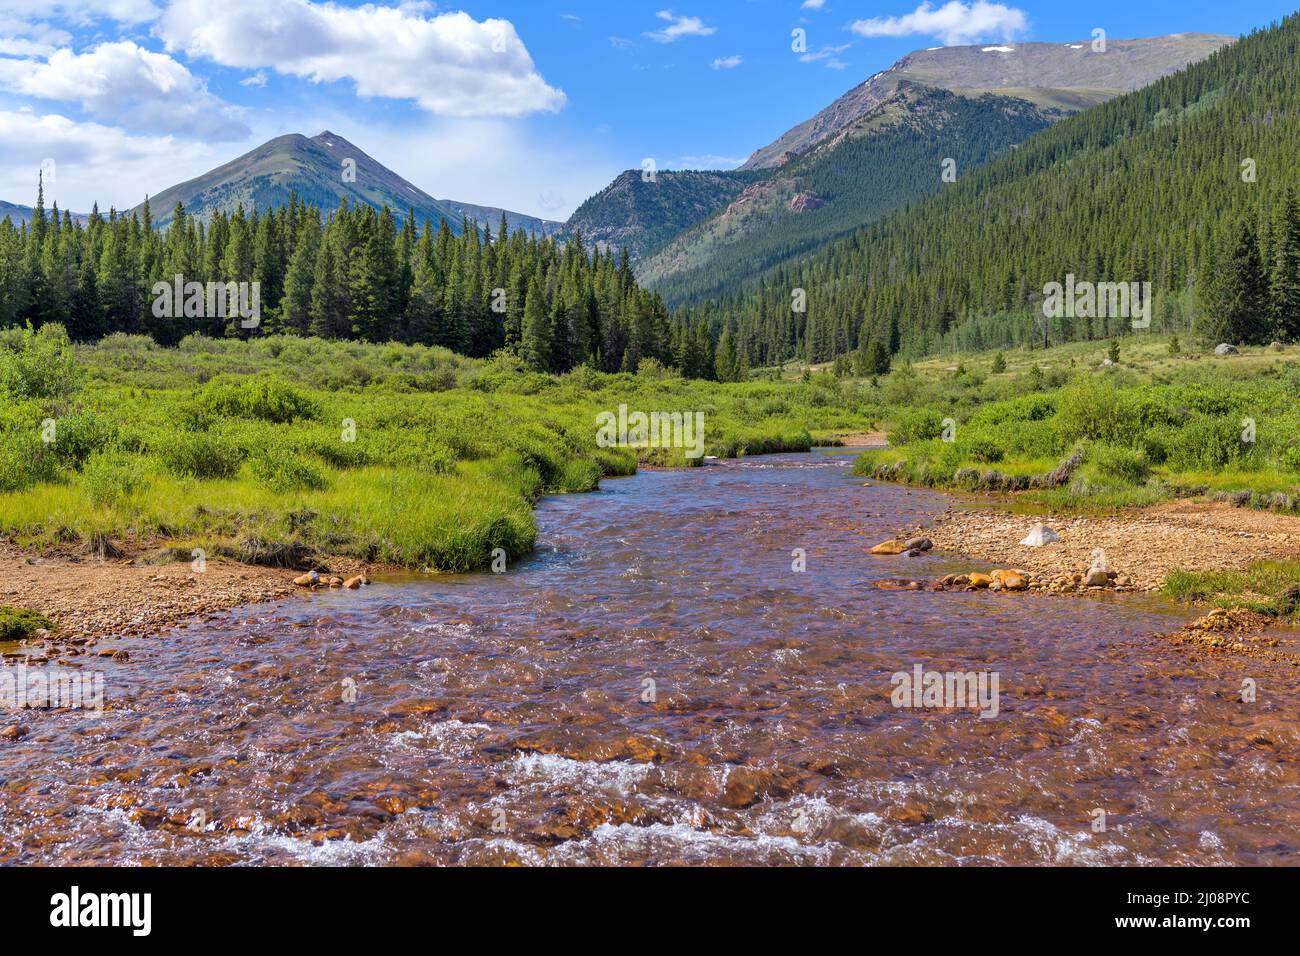 Summer Mountain Creek - Mineral-rich Geneva Creek running in a lush green valley at base of high peaks of Continental Divide, Grant, Colorado, USA. Stock Photo